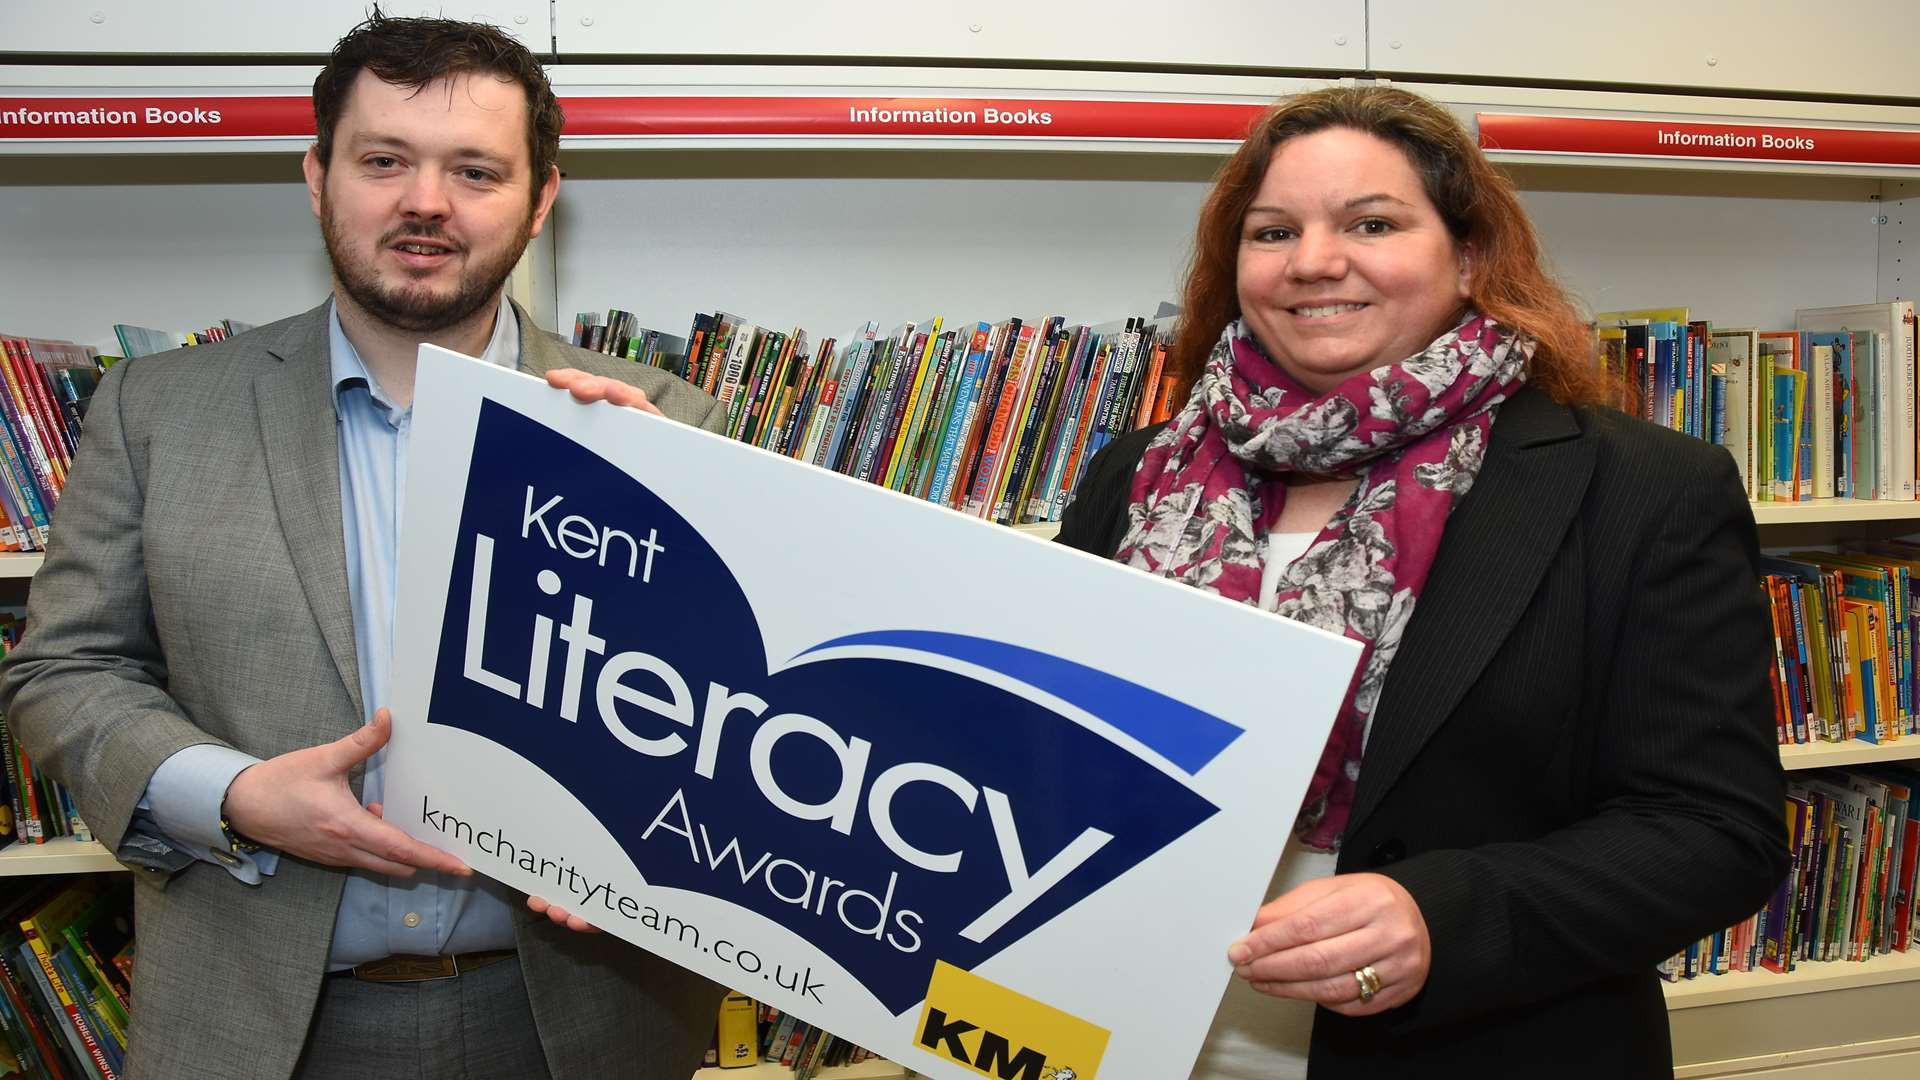 John and Claire Turner of media publication School News Group show their support for the Kent Literacy Awards. Nominations remain open until April 29.